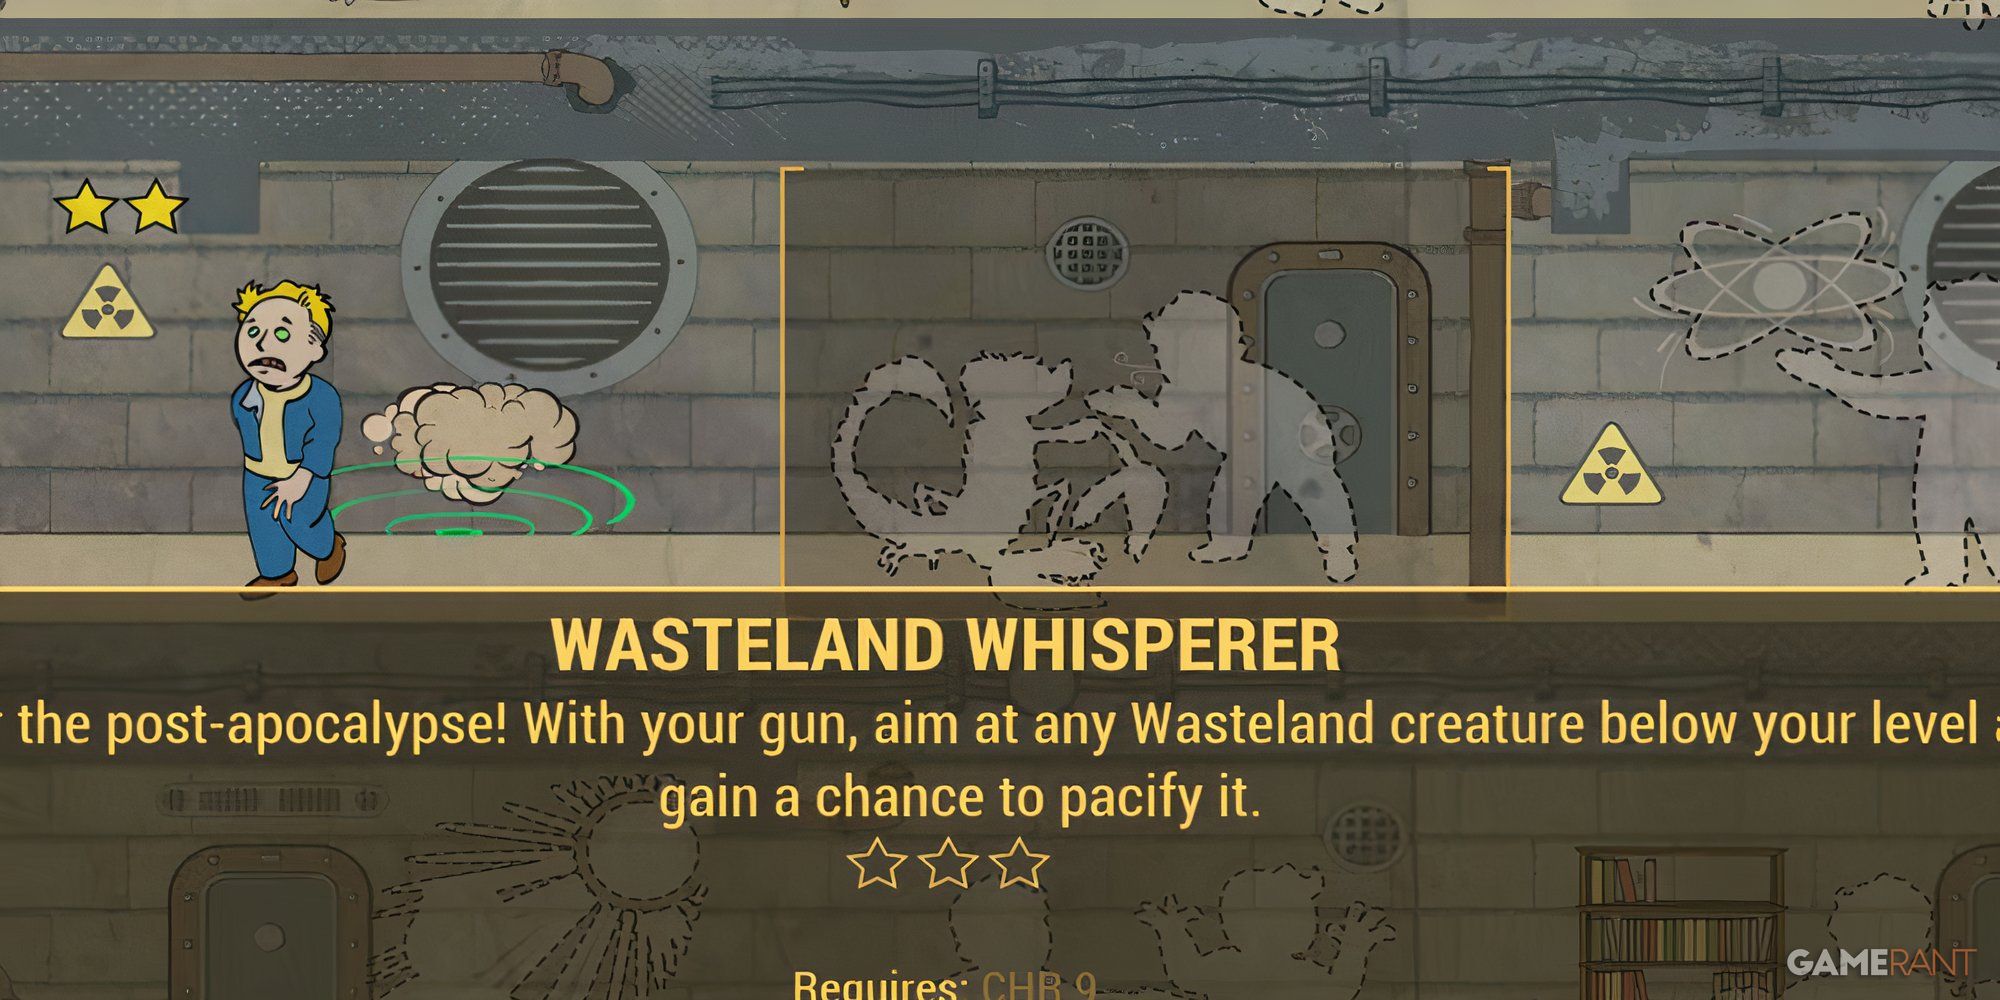 Closeup of the Wasteland Whisperer Perk and its description